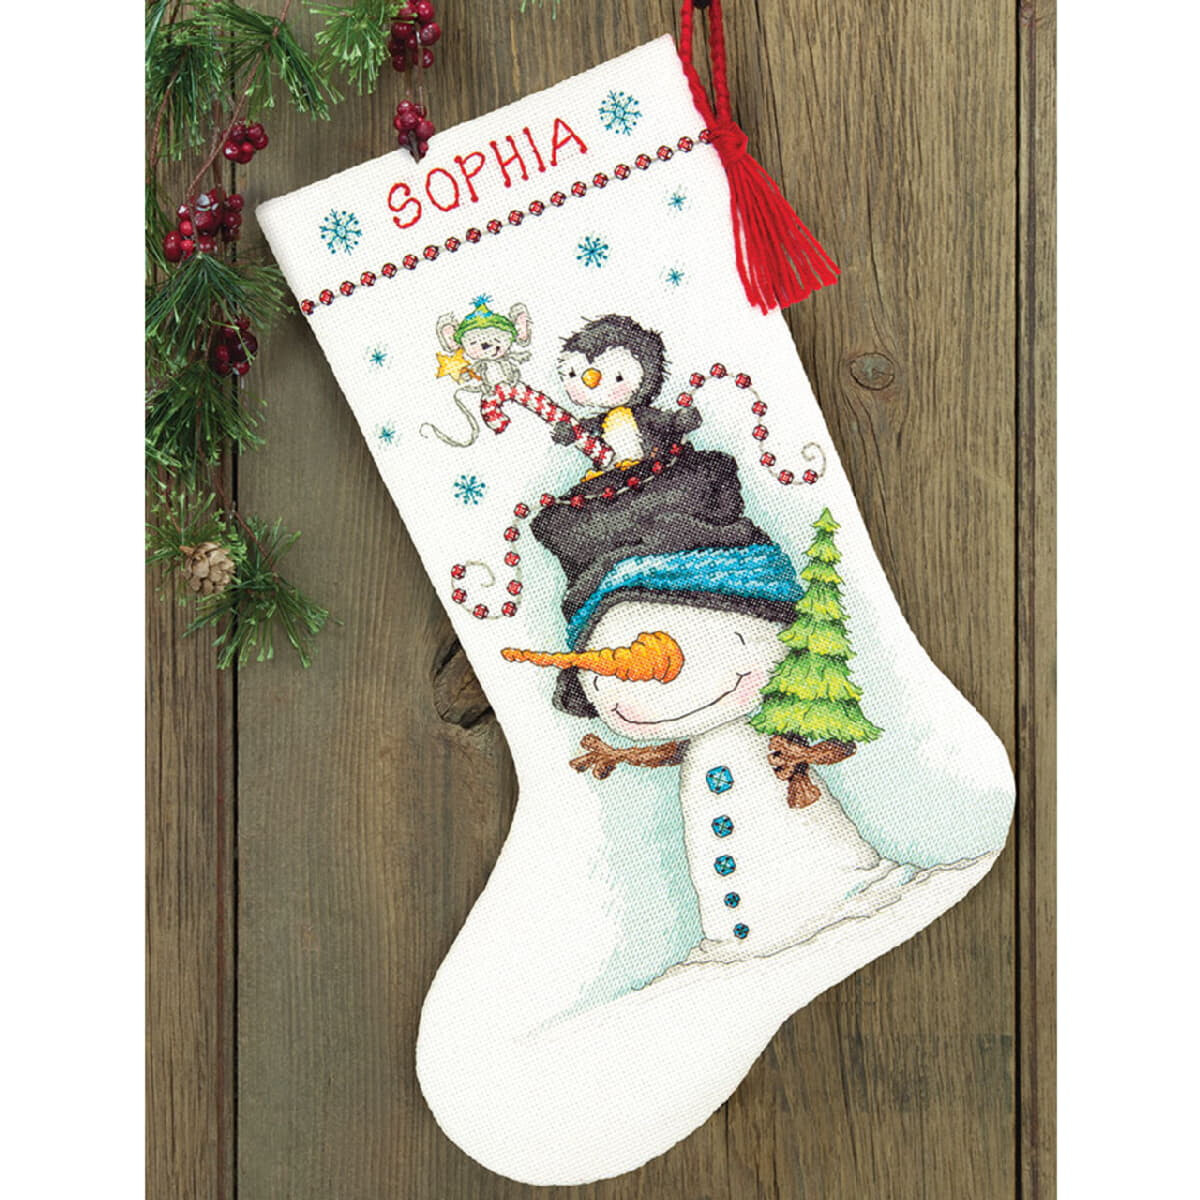 Dimensions counted cross stitch kit "Stocking Jolly...